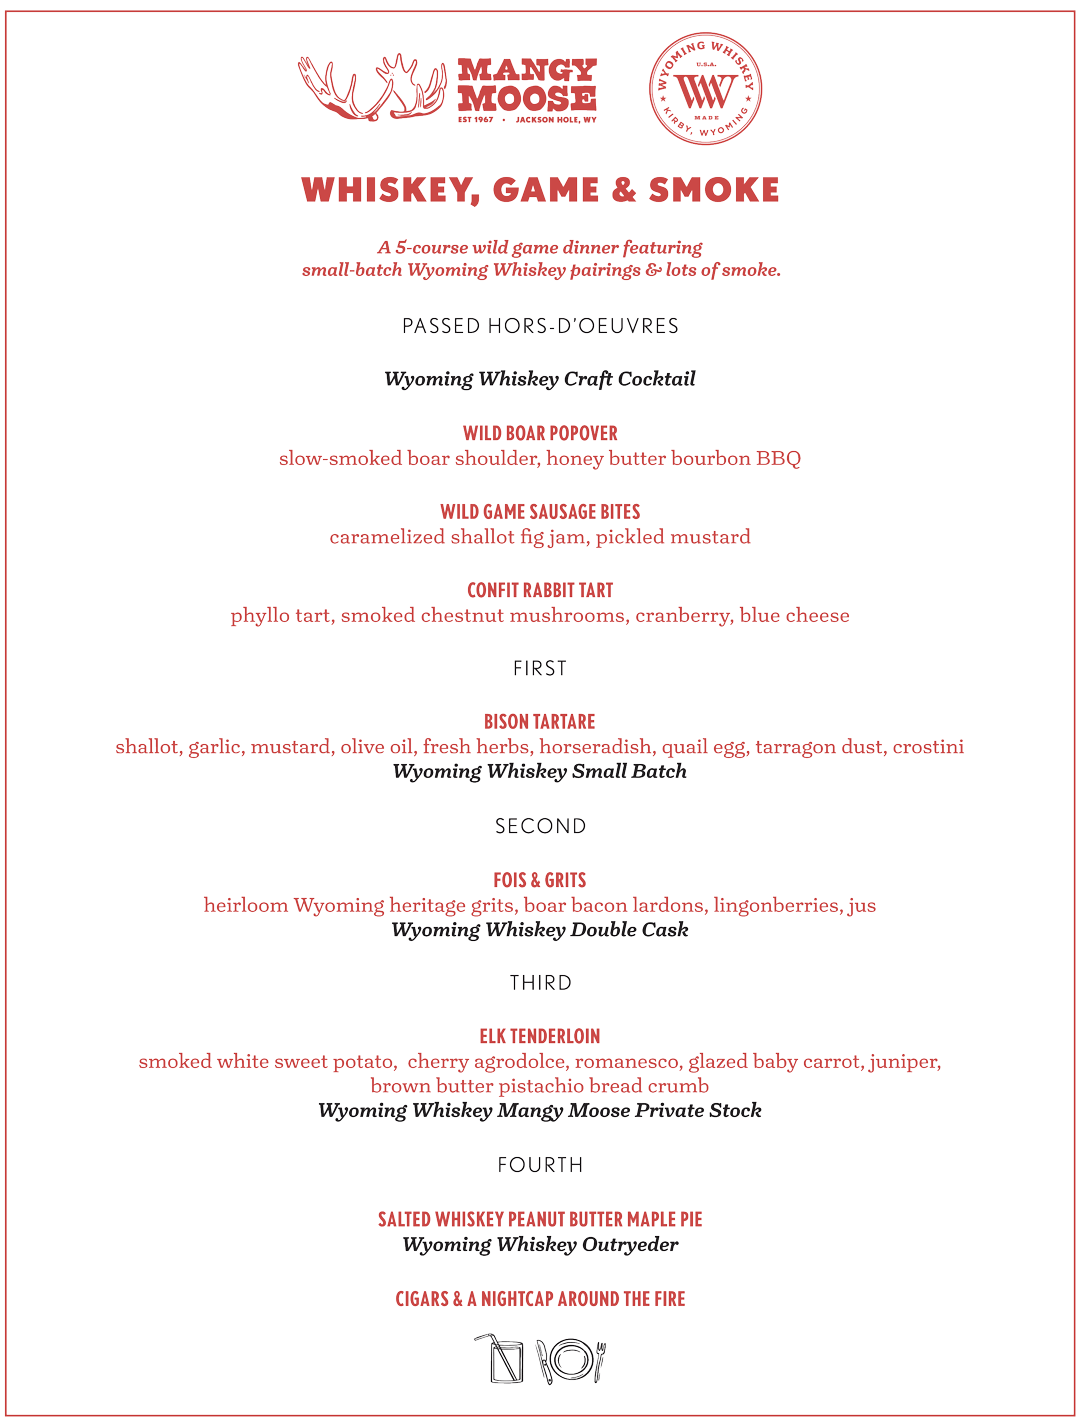 Menu for Whiskey, Game & Smoke Wild Game Dinner - a special 5-course dinner event from the Mangy Moose and Wyoming Whiskey